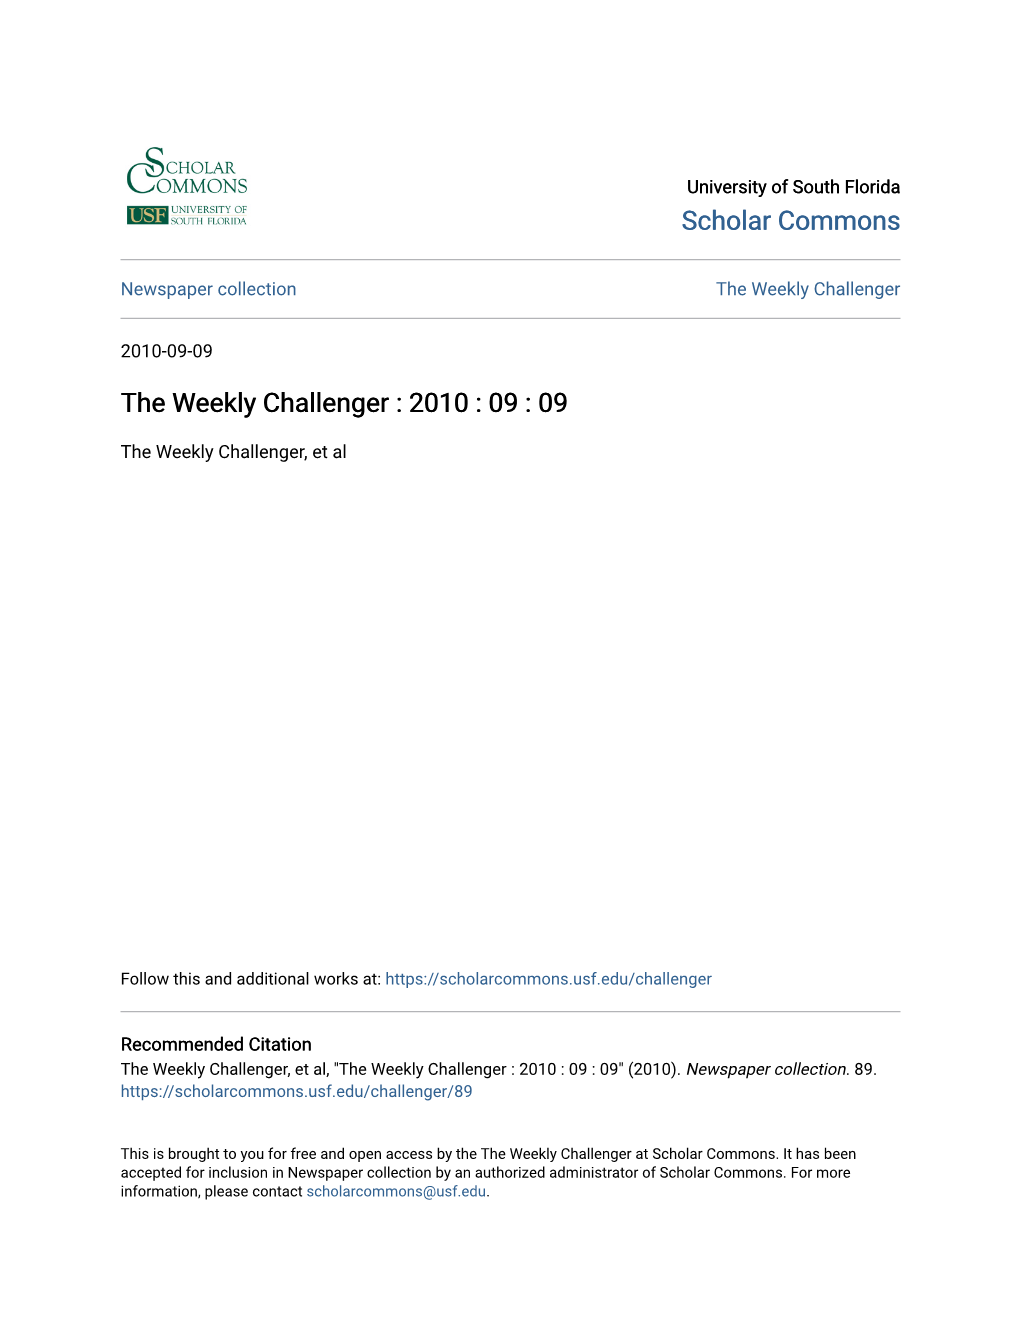 The Weekly Challenger